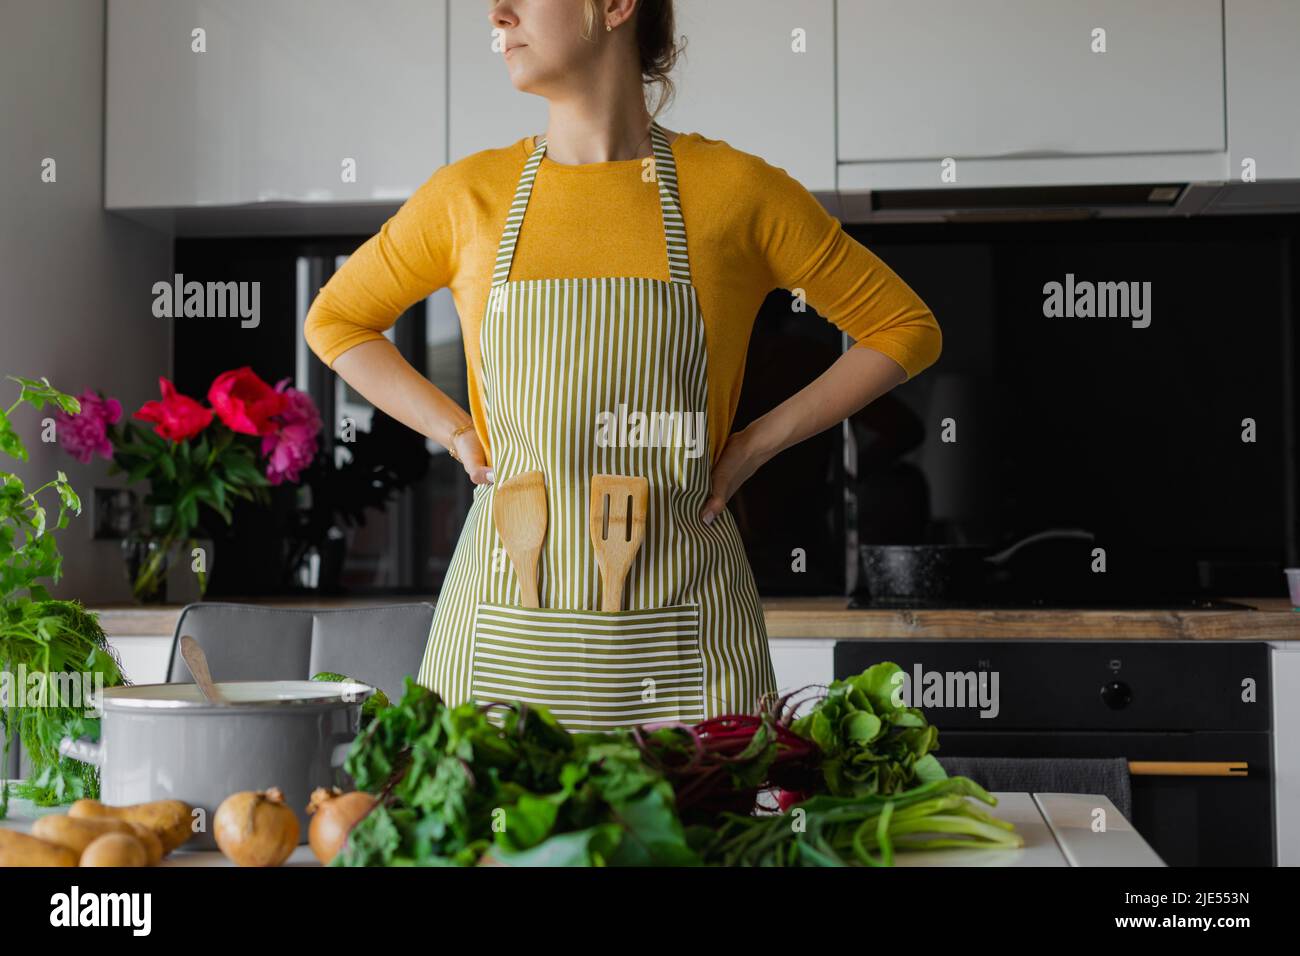 Cropped blonde woman in striped kitchen apron with wooden spatula utensil inside. Female arms akimbo, choose ingredients Stock Photo